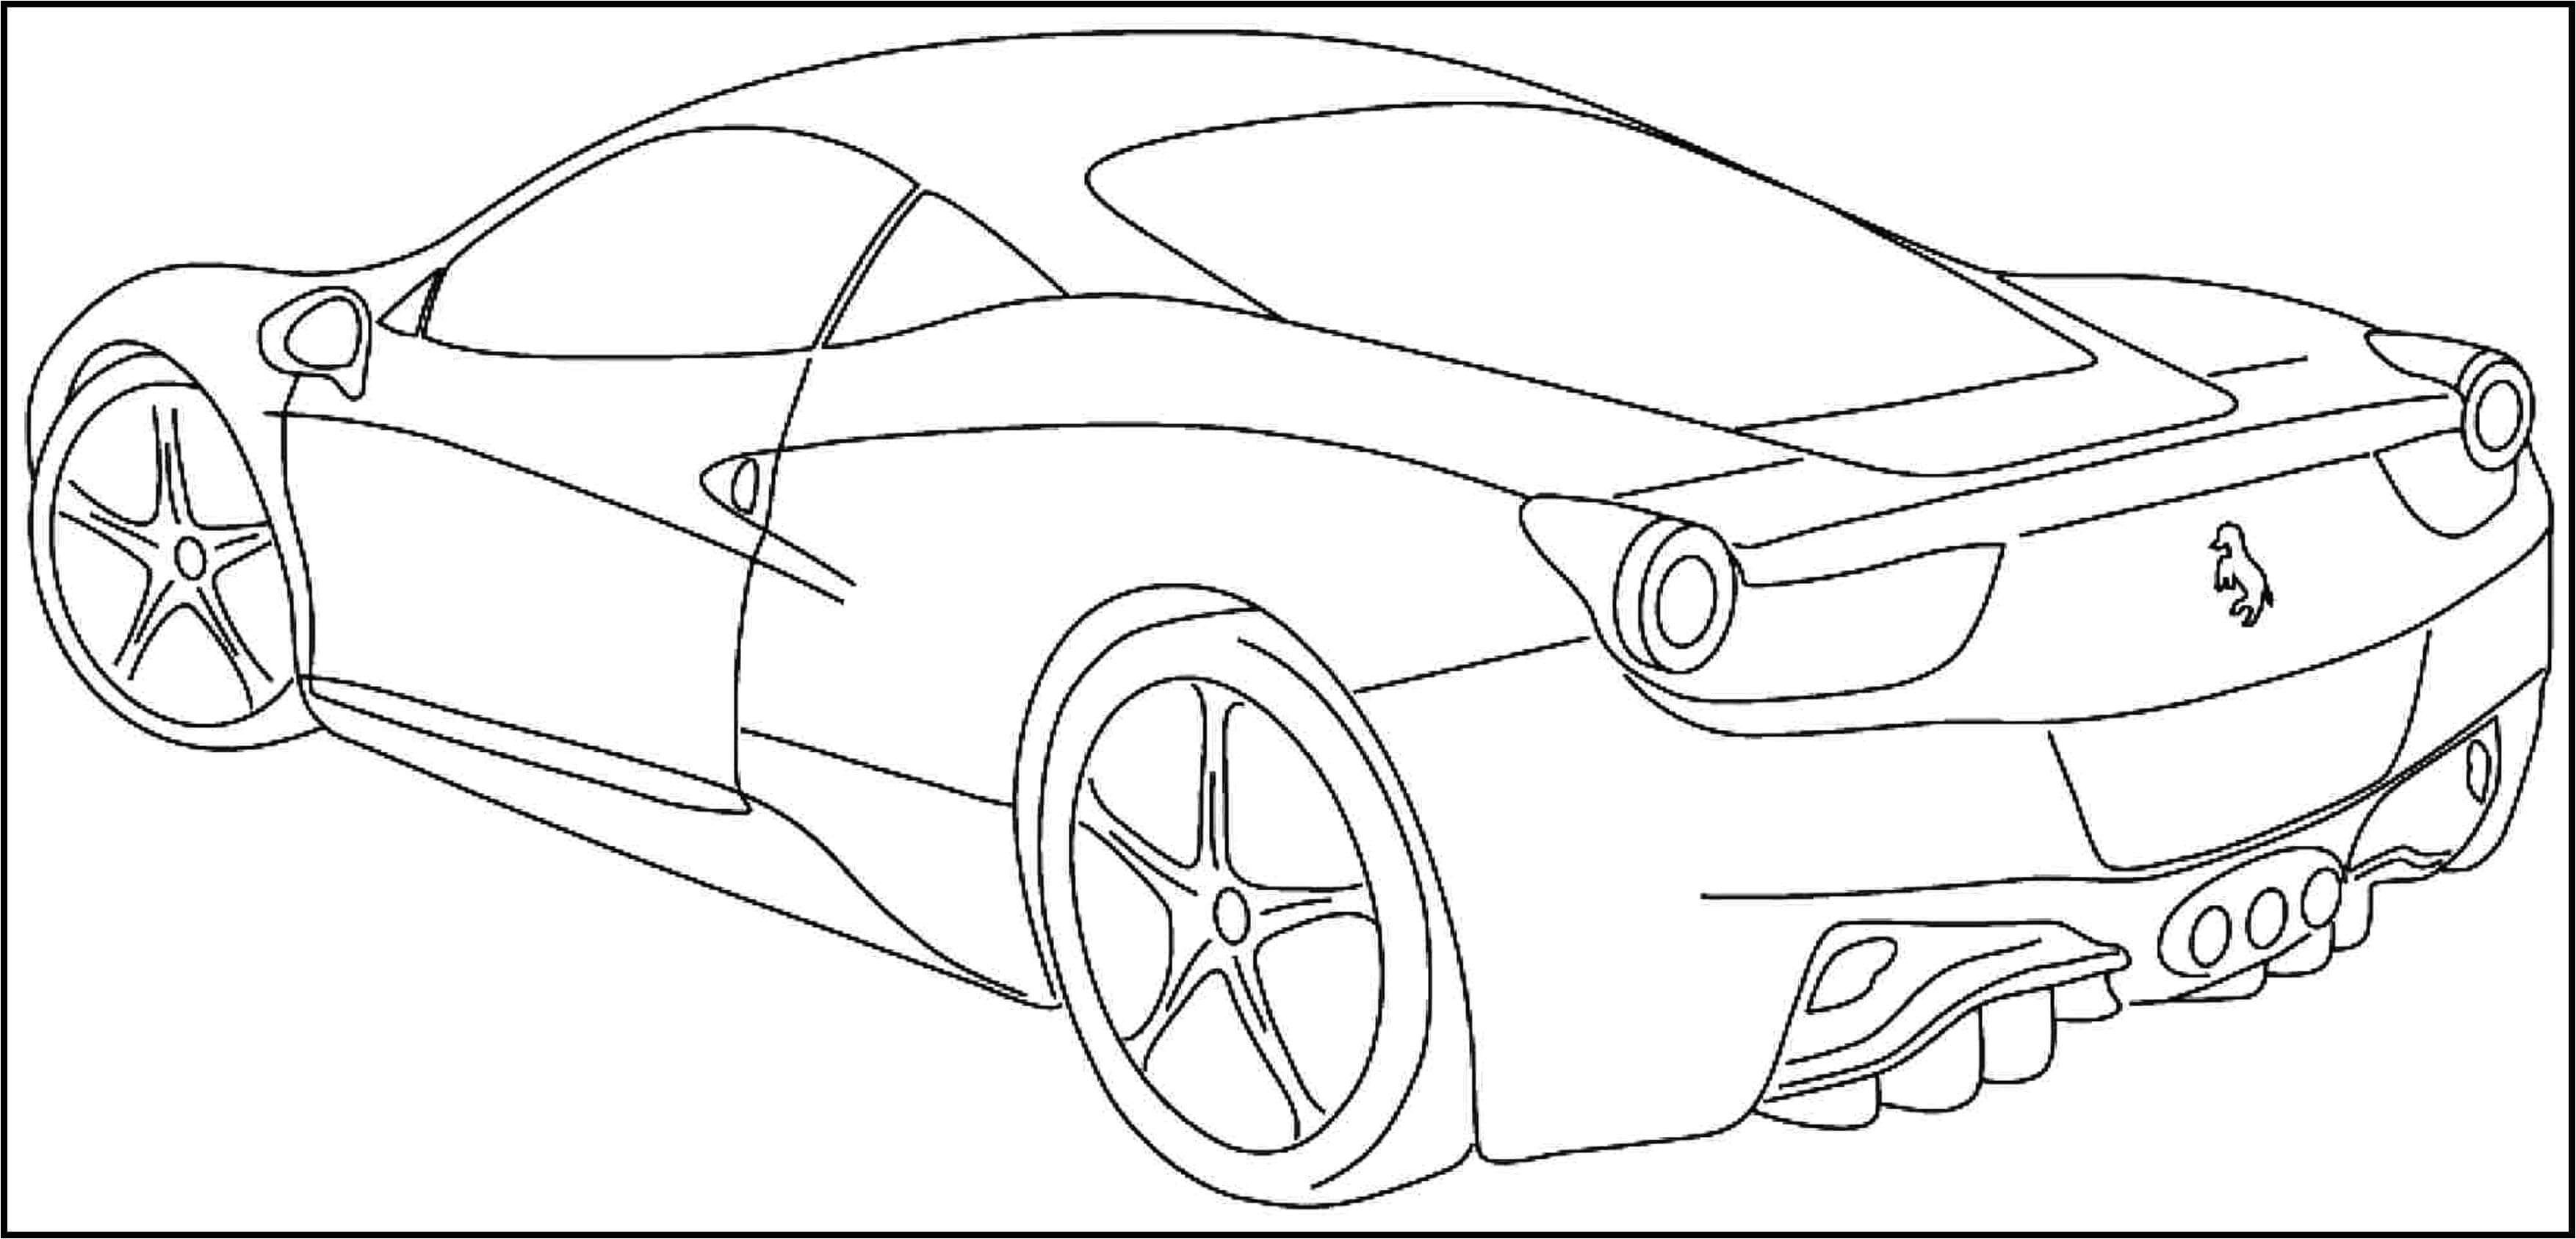 Printable sports car coloring pages for kids & teens Download or print this cool clip art as pdf sheets for free make the game coloring pictures for your